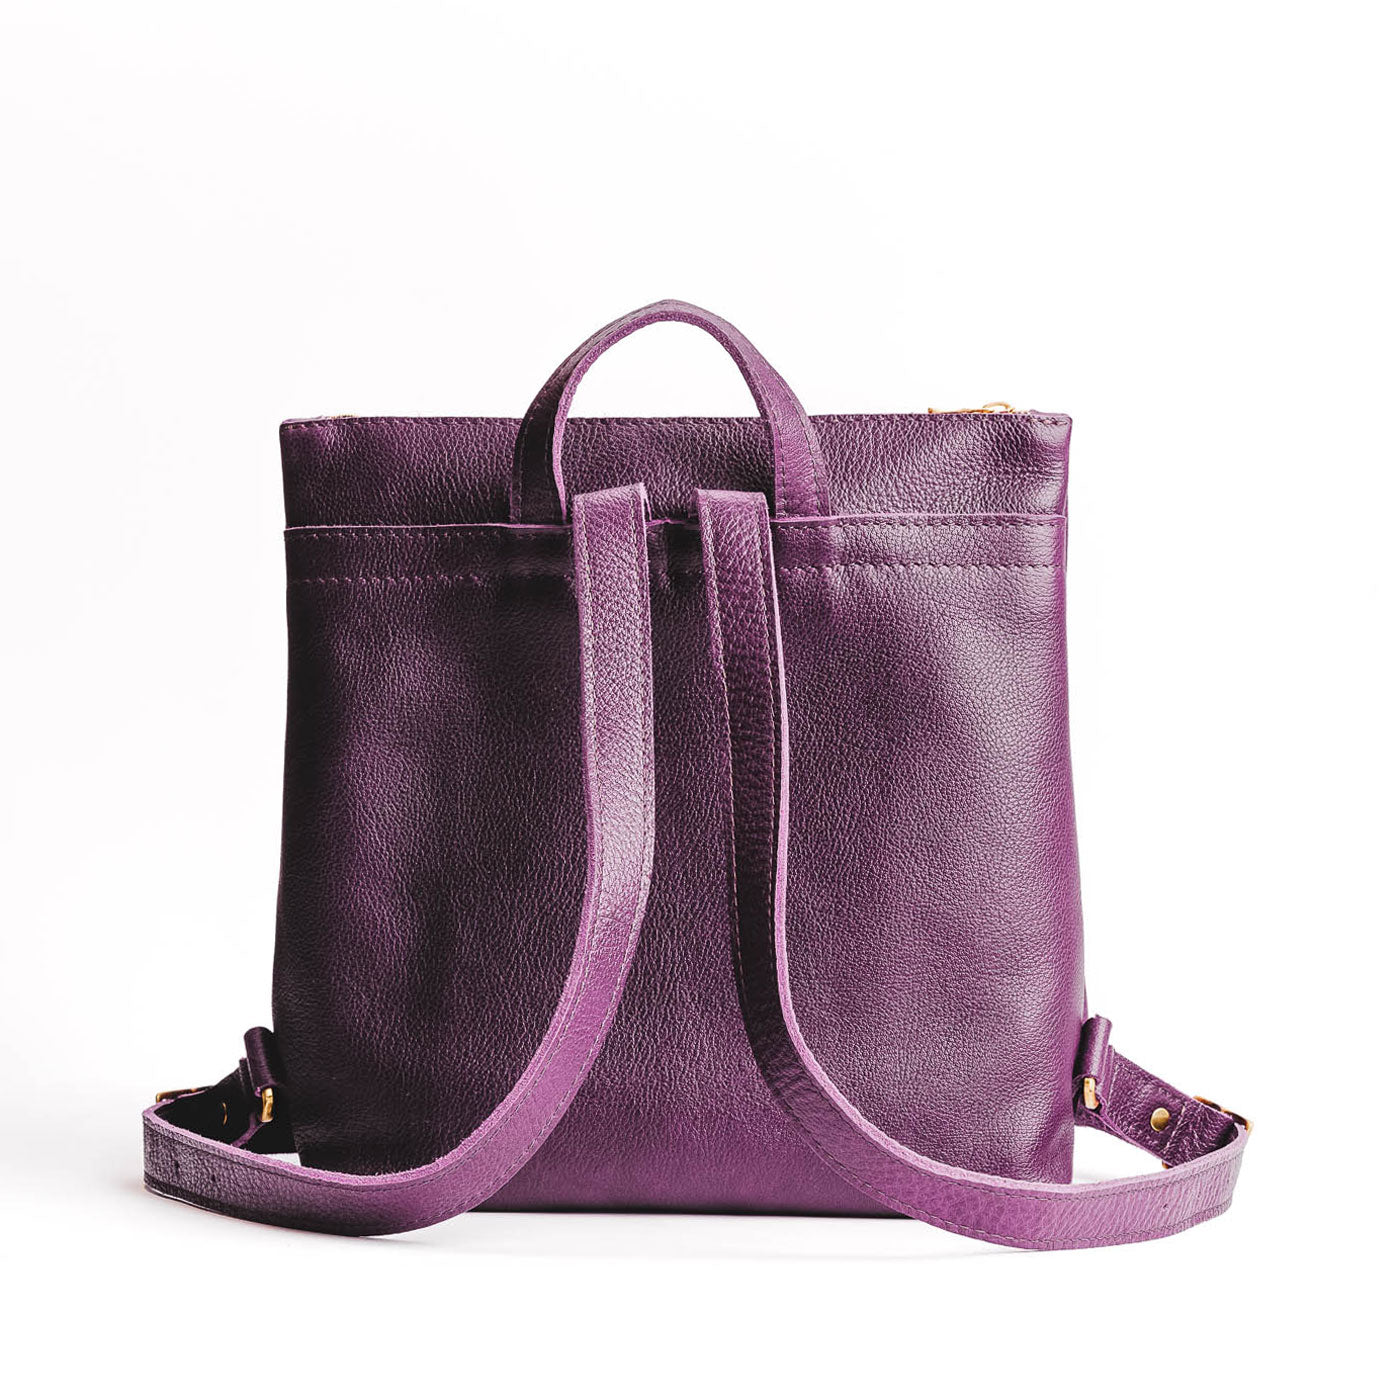 All Color: Plum